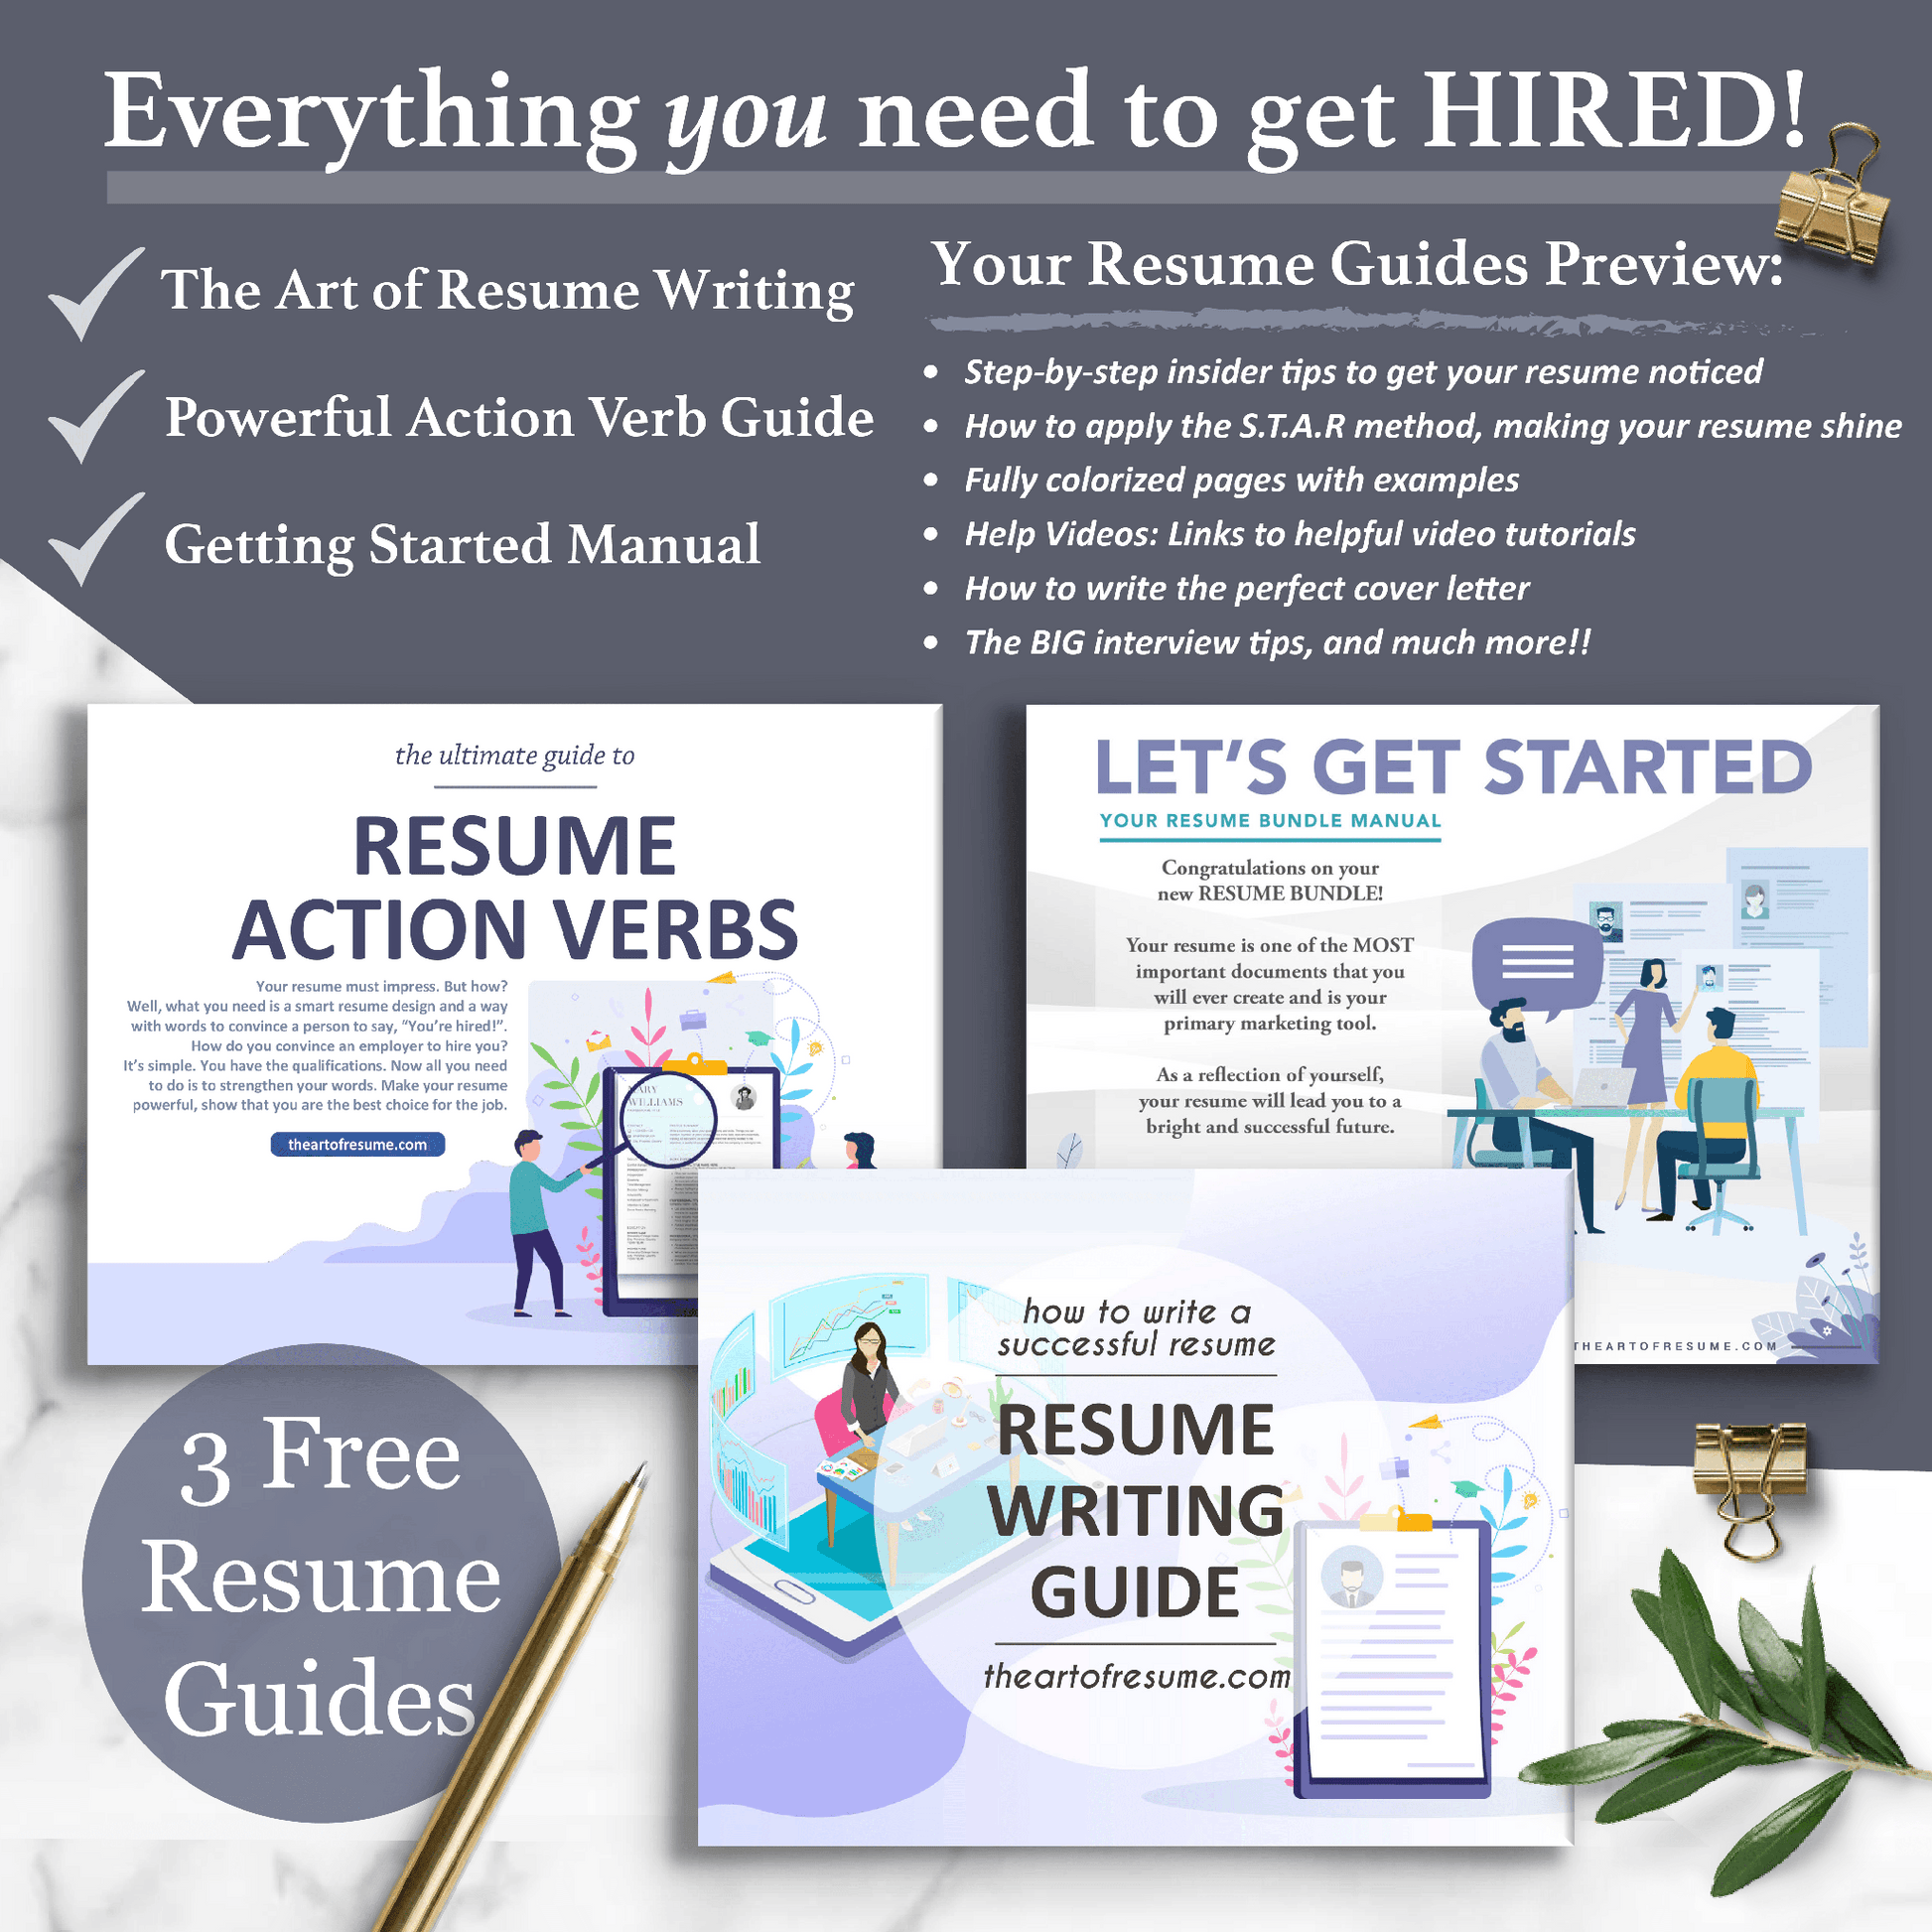 Resume Template Bundle Includes Free Resume Writing Guide, Resume Action Verb Guide, Resume Template Instructional Manual